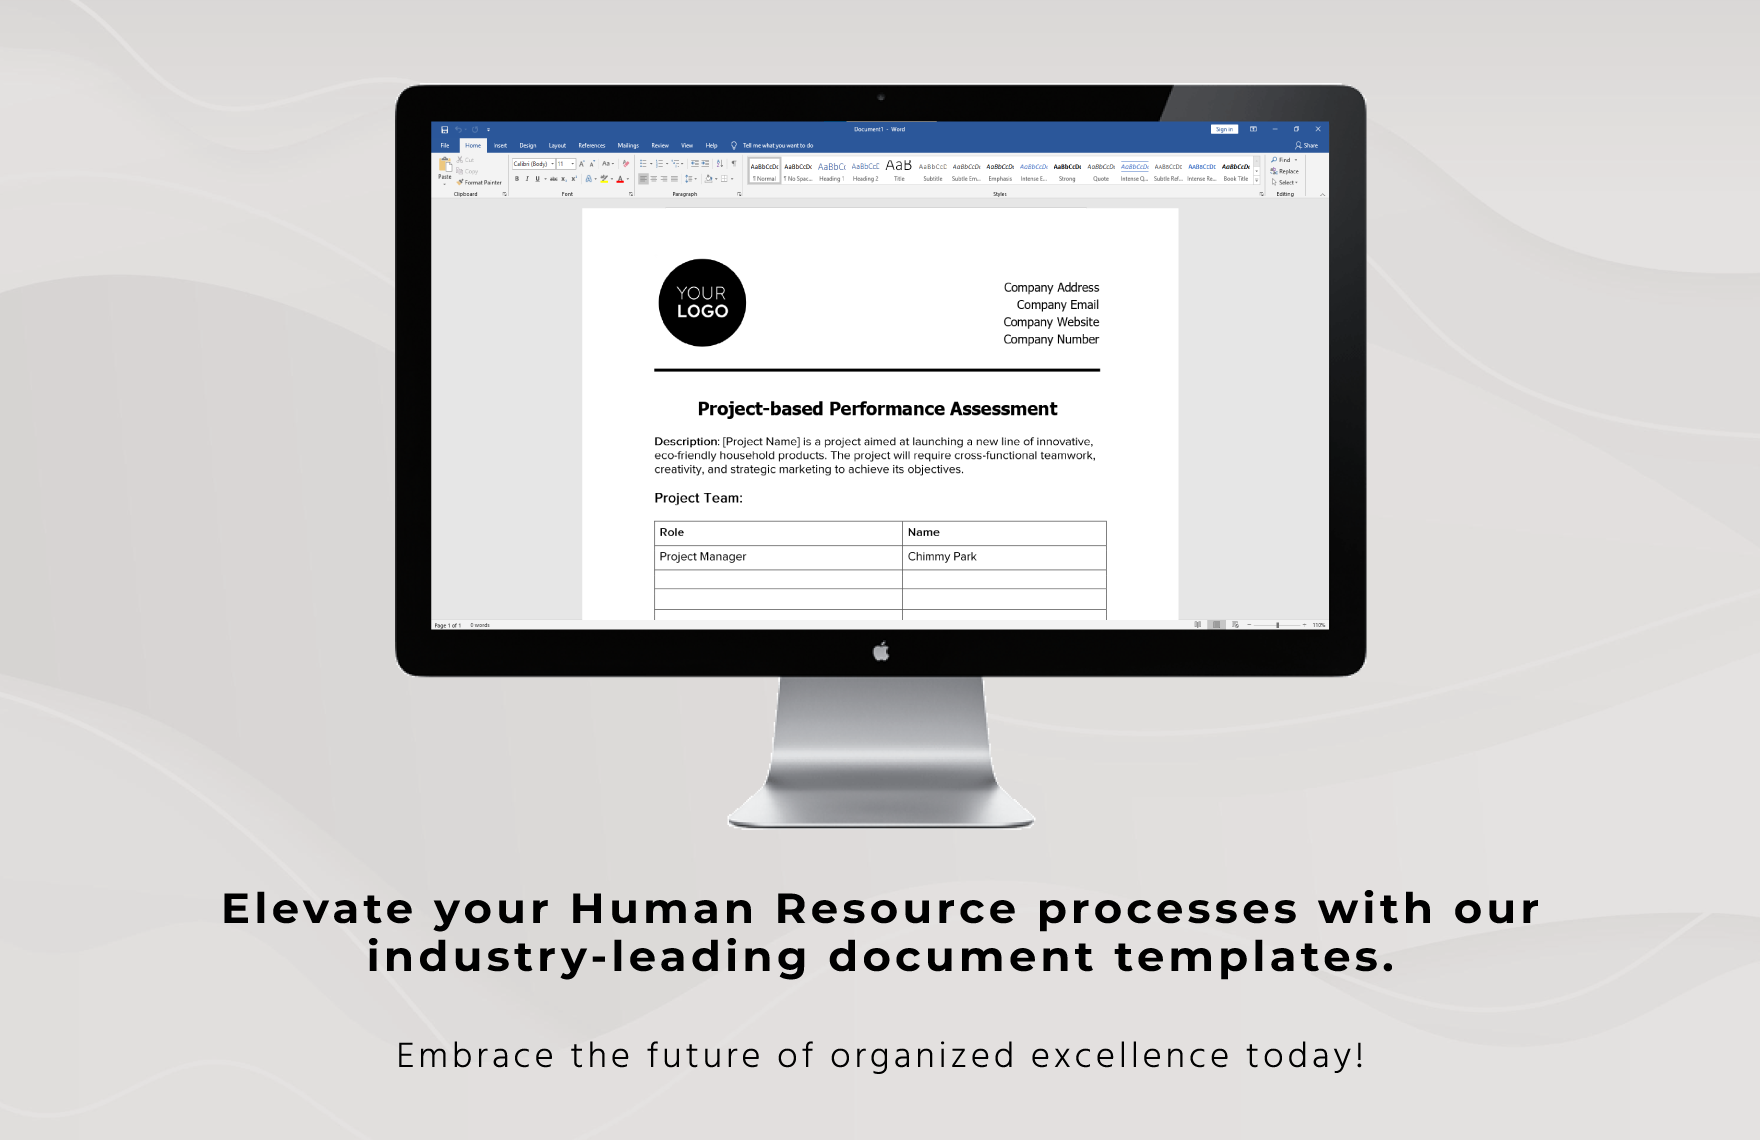 Project-based Performance Assessment HR Template